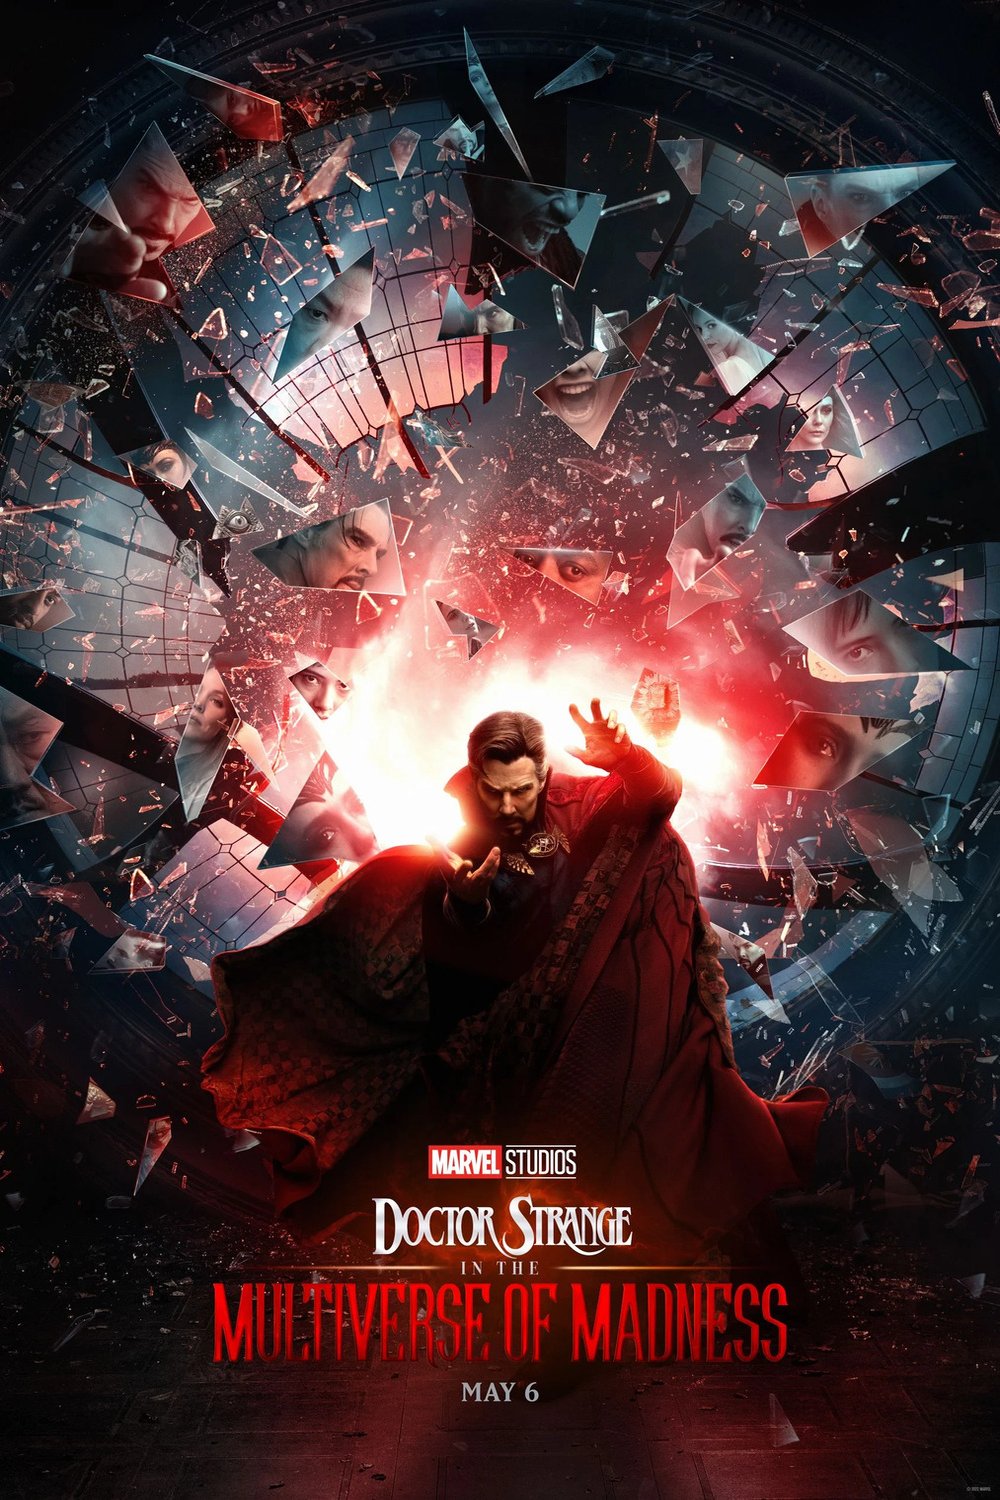 Poster of the movie Doctor Strange in the Multiverse of Madness